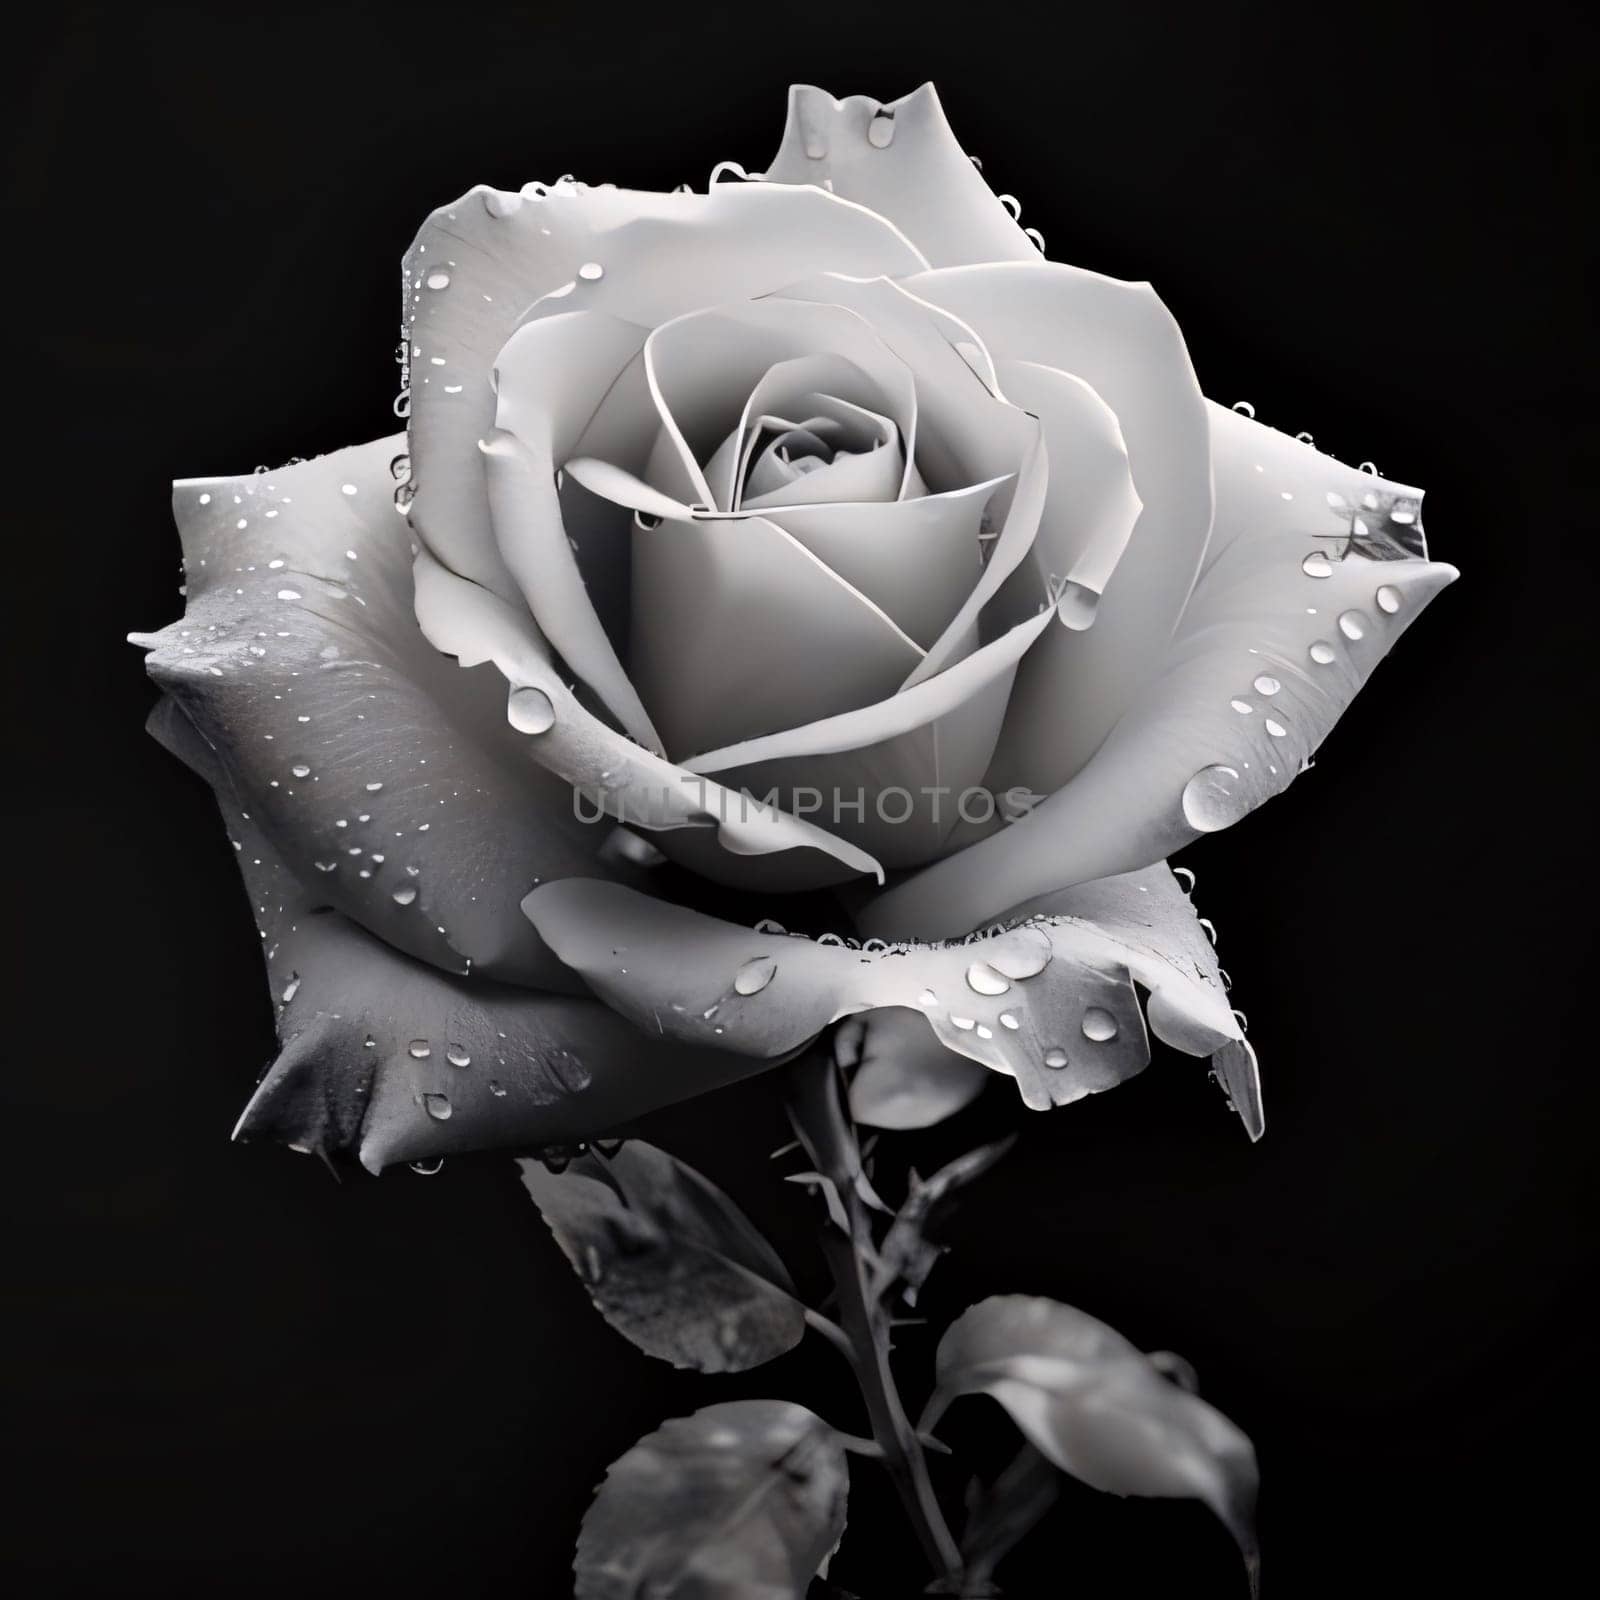 White Rose on a dark background drops of dew, water, rain. Flowering flowers, a symbol of spring, new life. A joyful time of nature waking up to life.